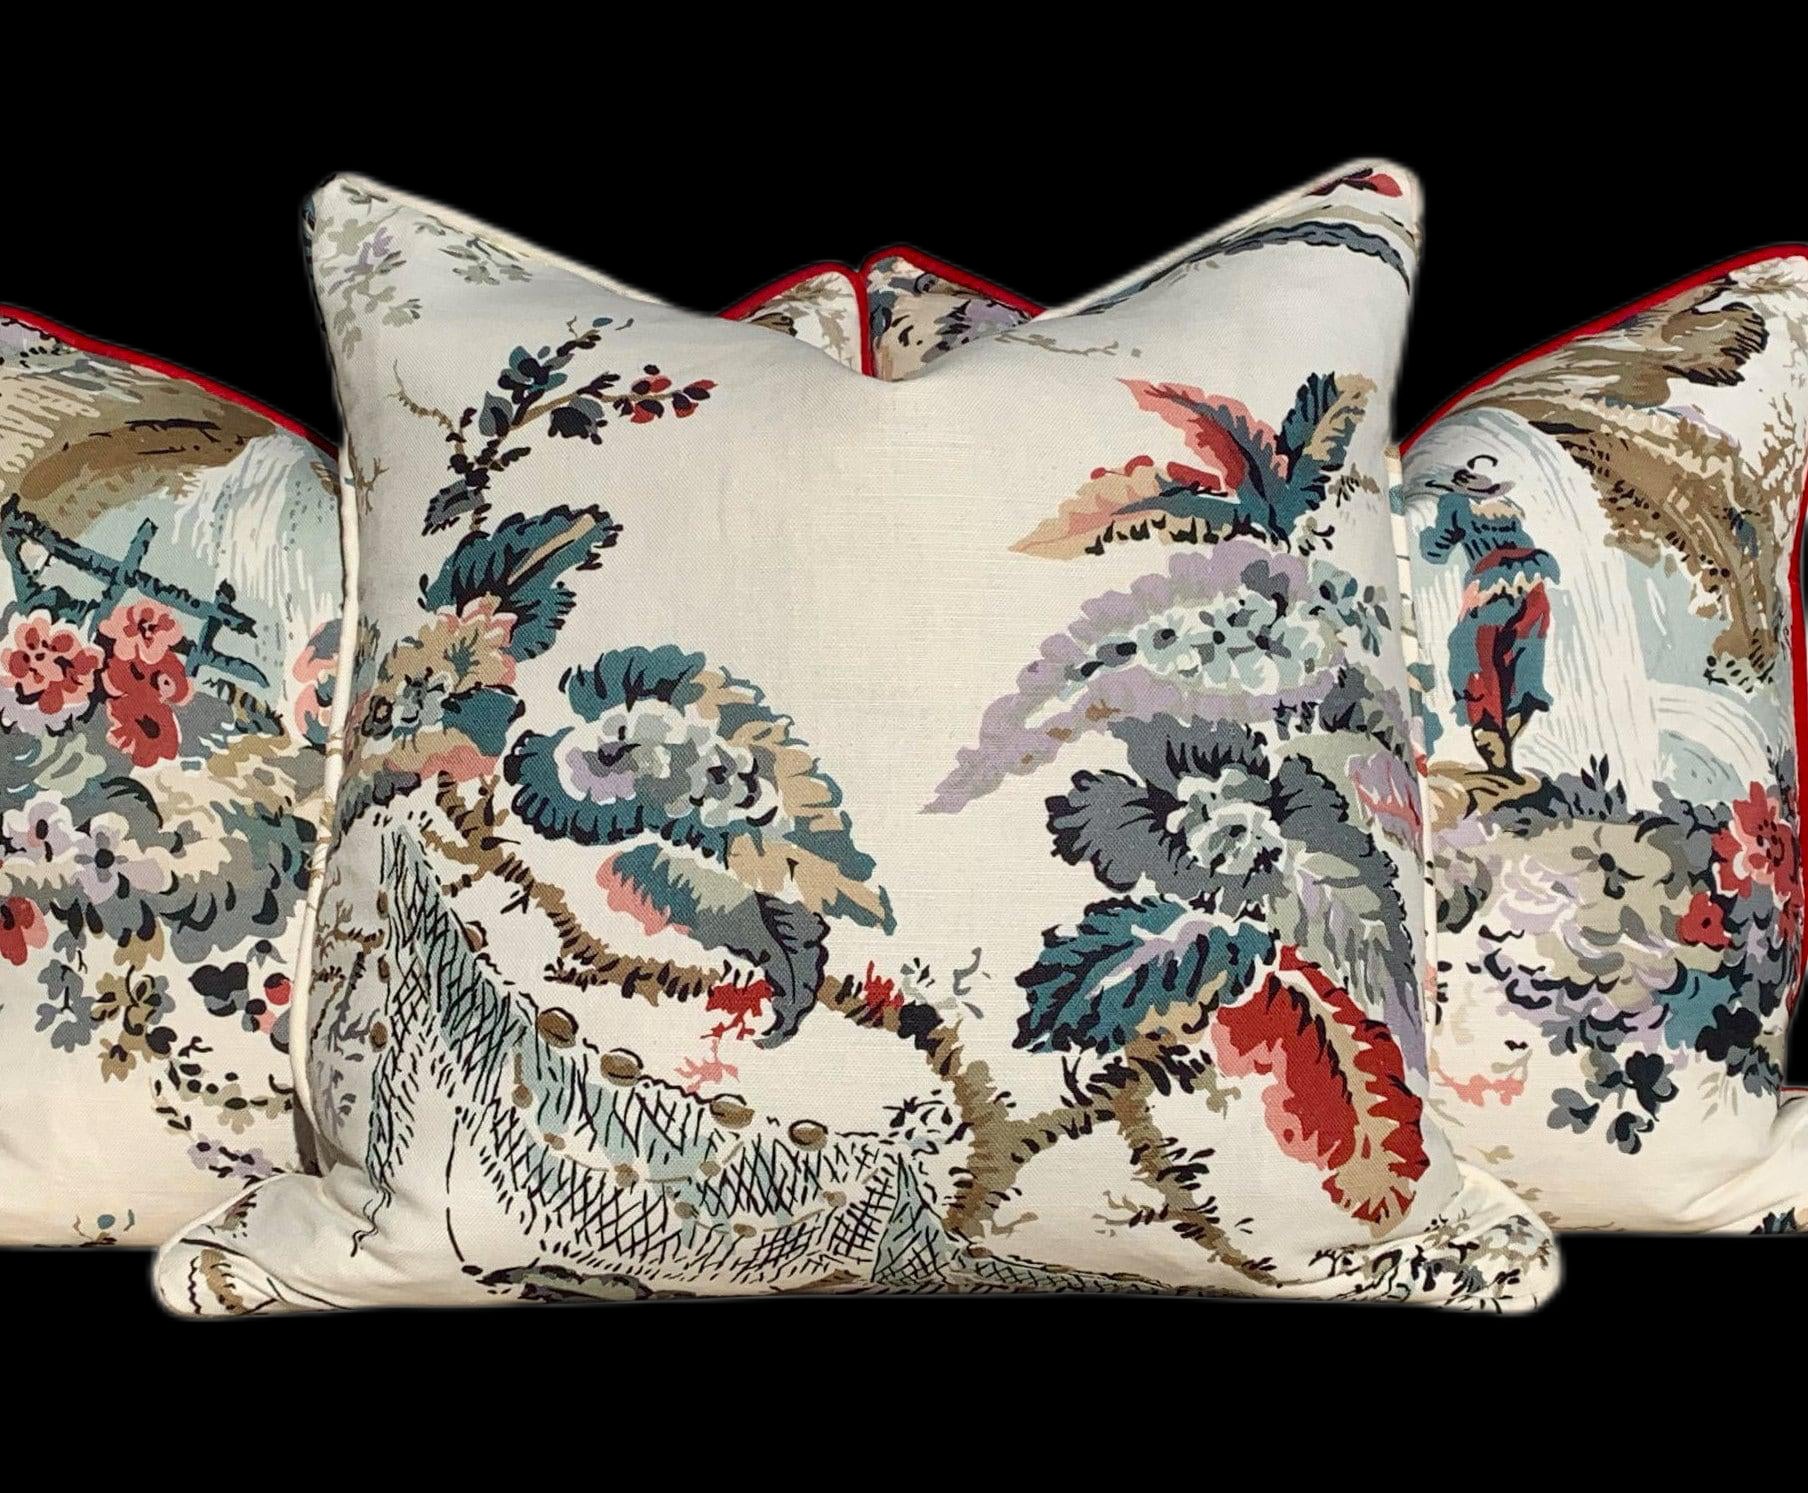 Thibaut Moorea Floral Linen Pillow in Cream and Red. Floral LInen Pillow, Lumbar Cream Red Pillow, Bedding Pillows, Ivory Cushion Cover